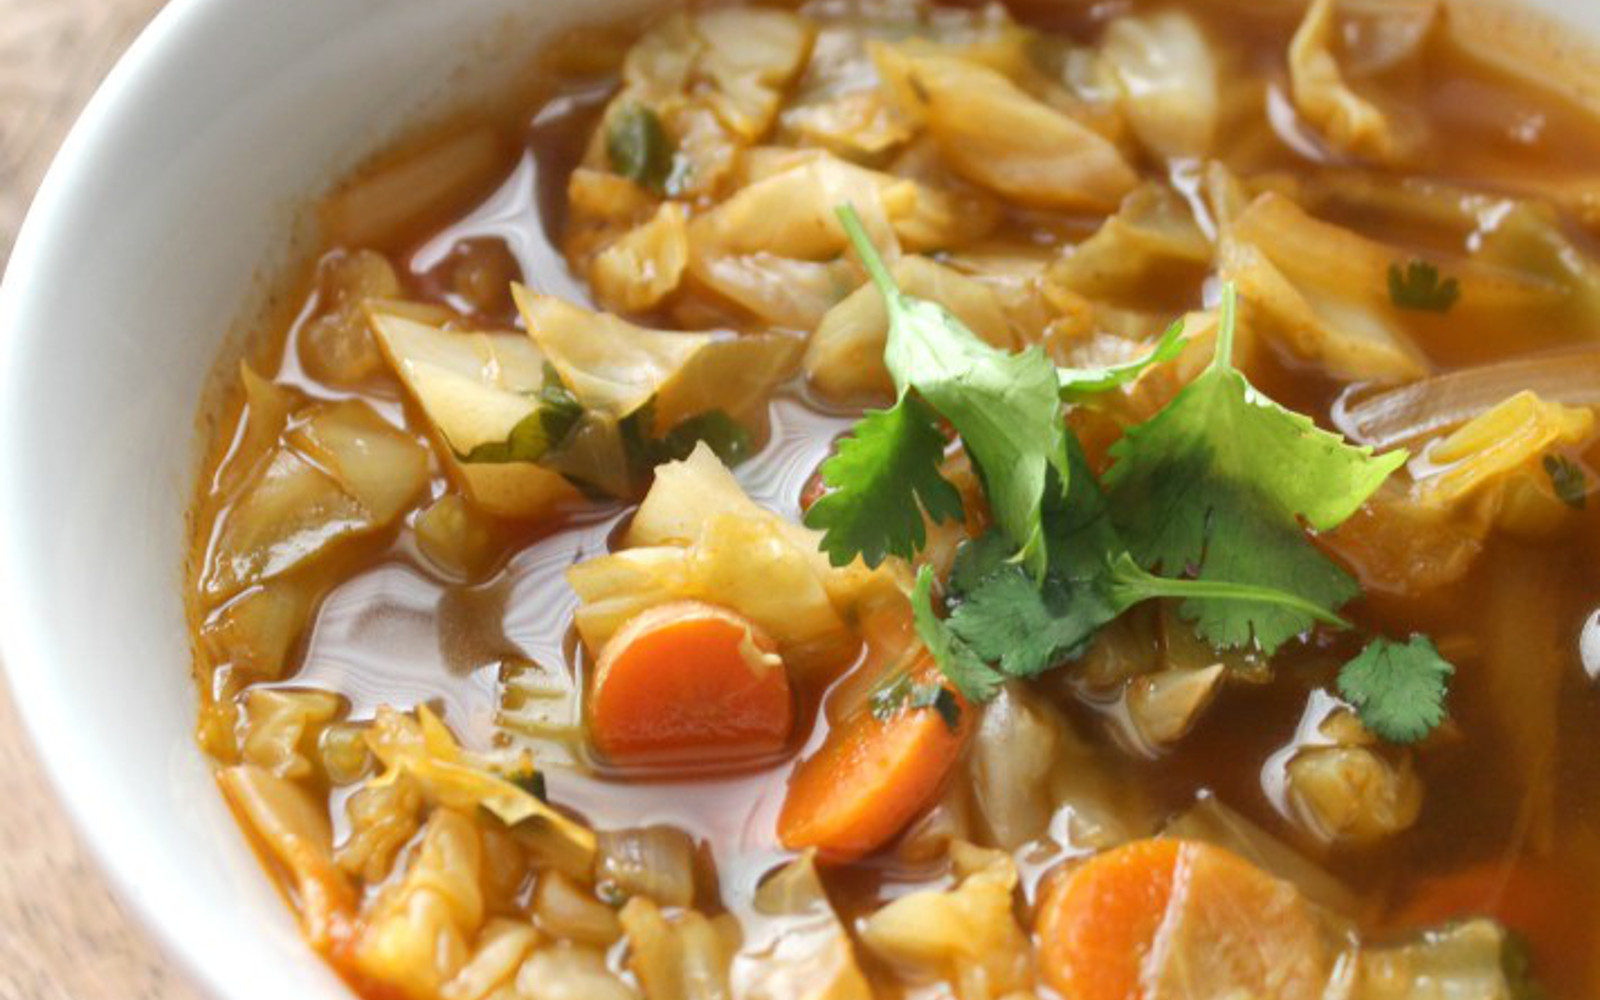 Vegan Gluten-Free Spicy Cabbage Detox Soup topped with parsley